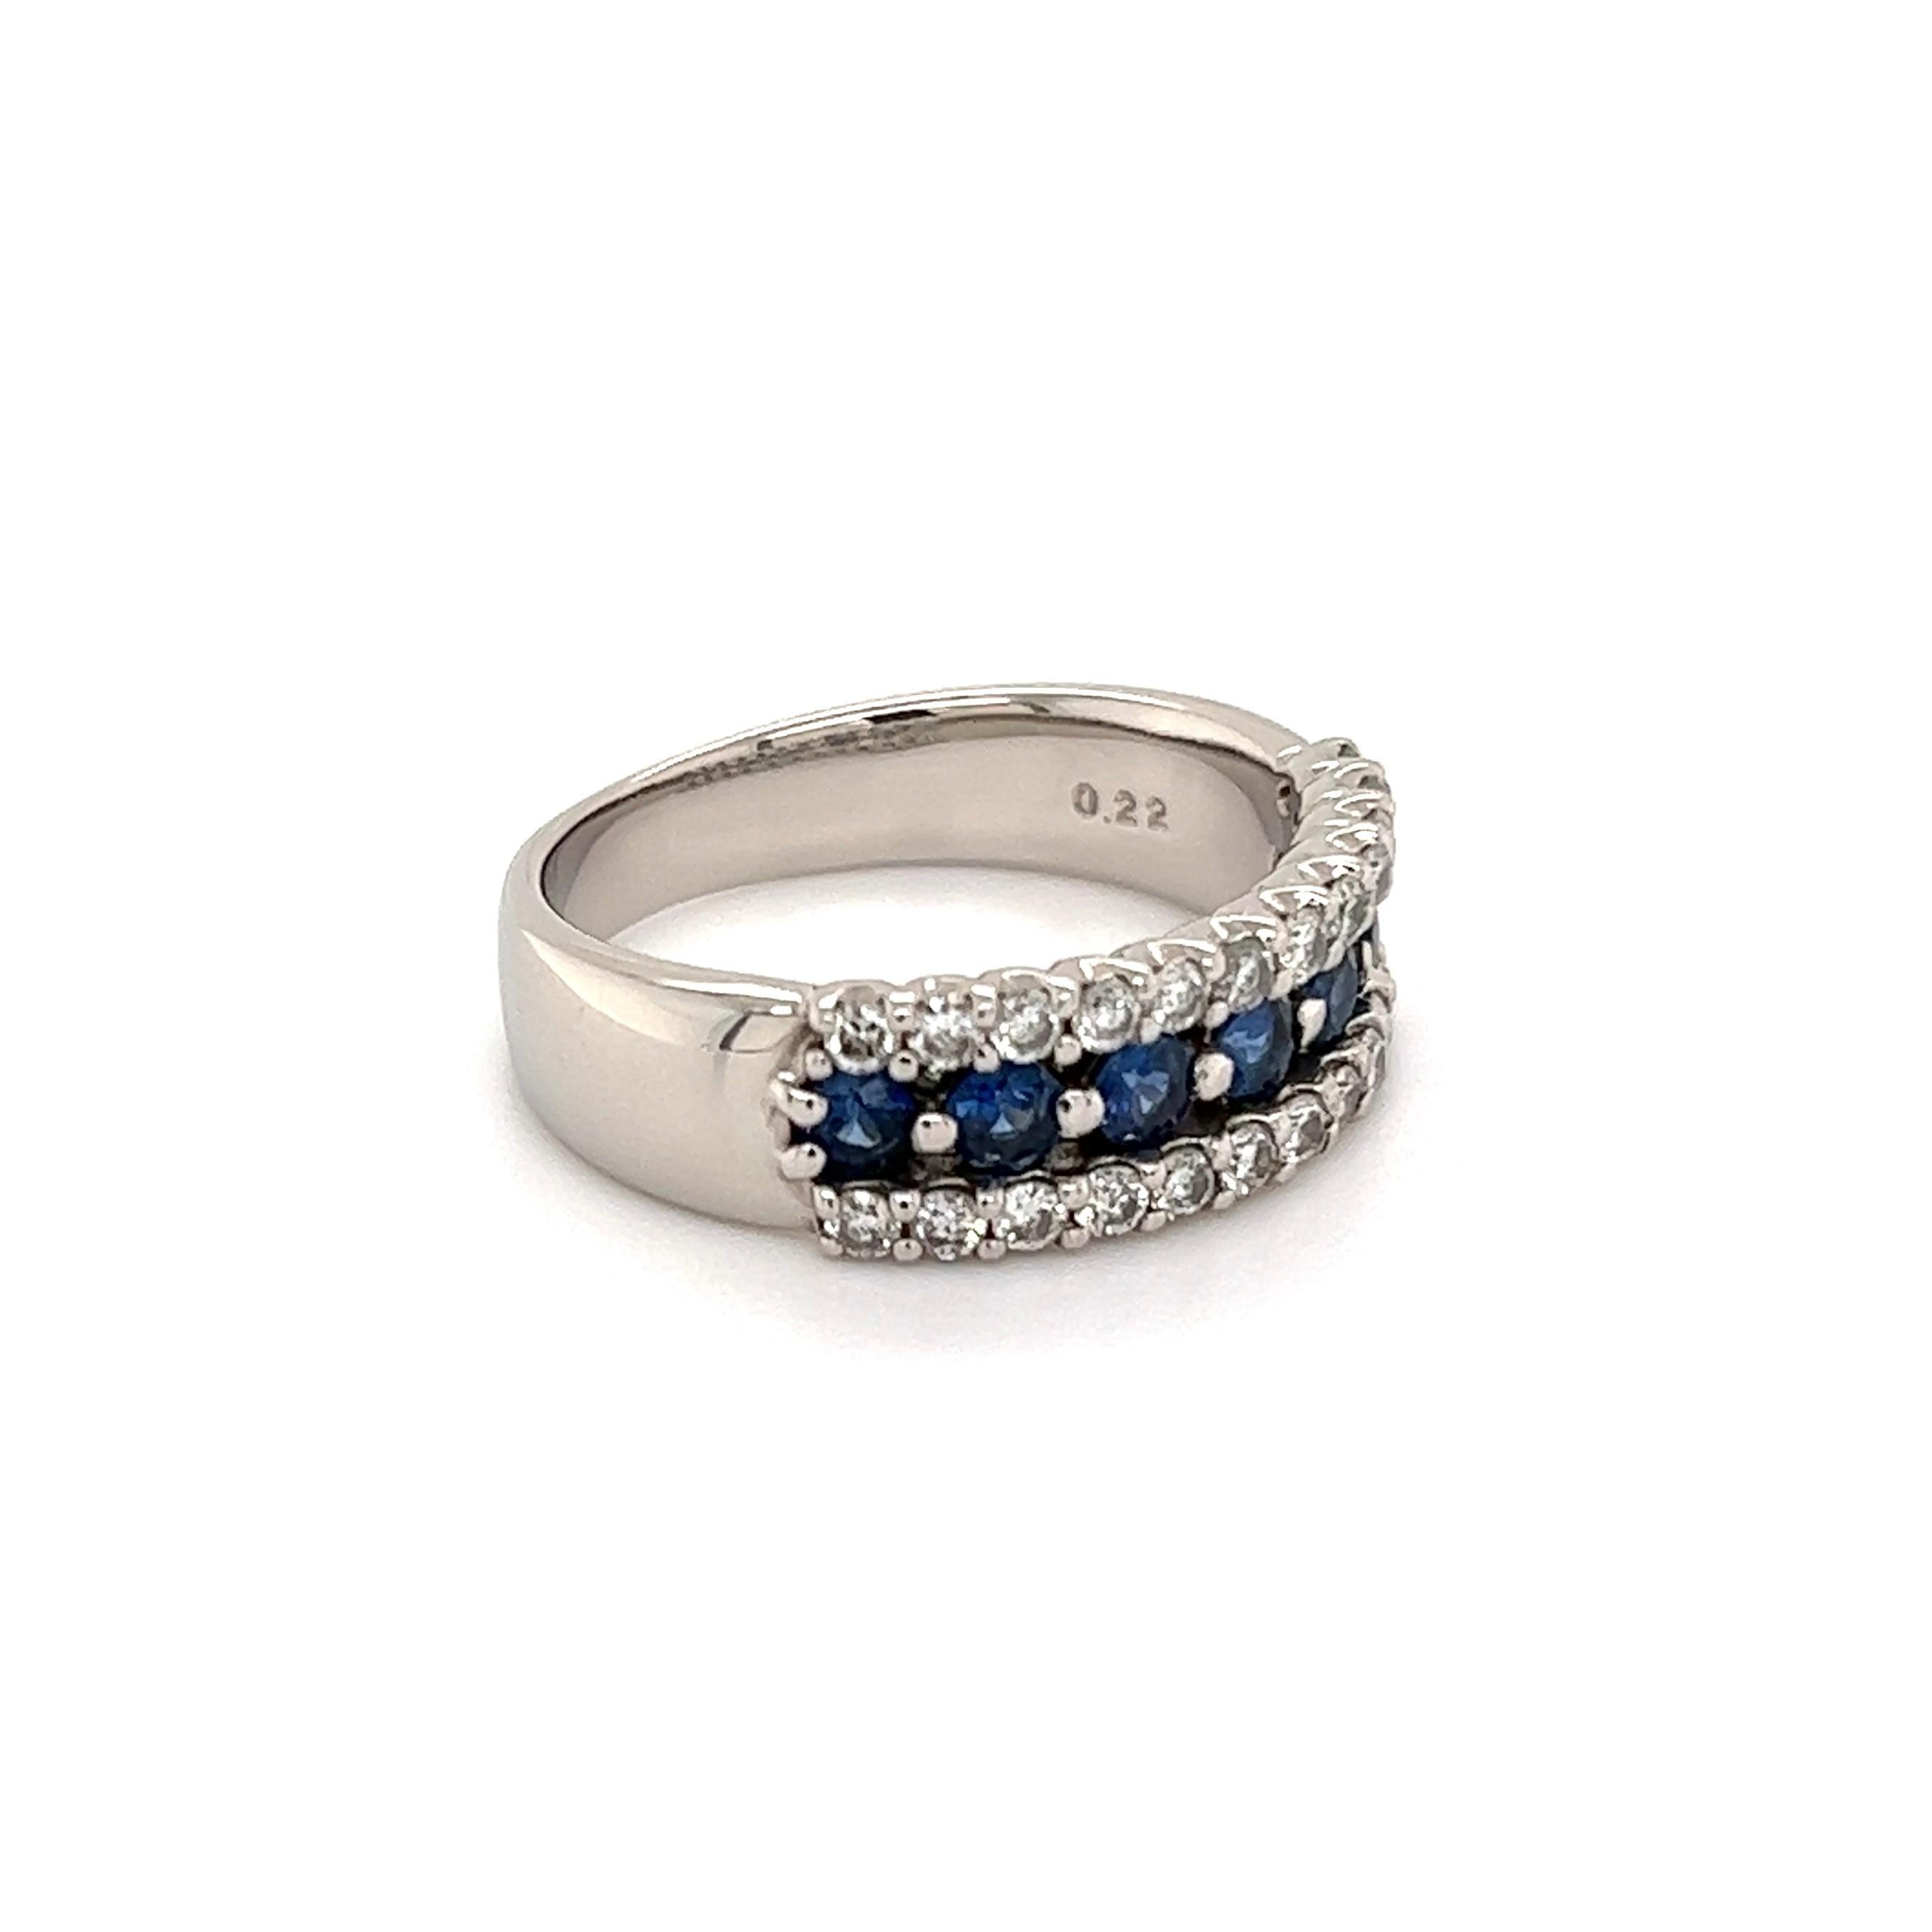 Simply Beautiful! Platinum Sapphire and Diamond Cocktail Band Ring. Centering securely Hand set Blue Sapphires, weighing approx. 0.55tcw and enhanced with Diamonds, weighing approx. 0.22tcw. Hand crafted in Platinum. Measuring approx. 0.82”l x